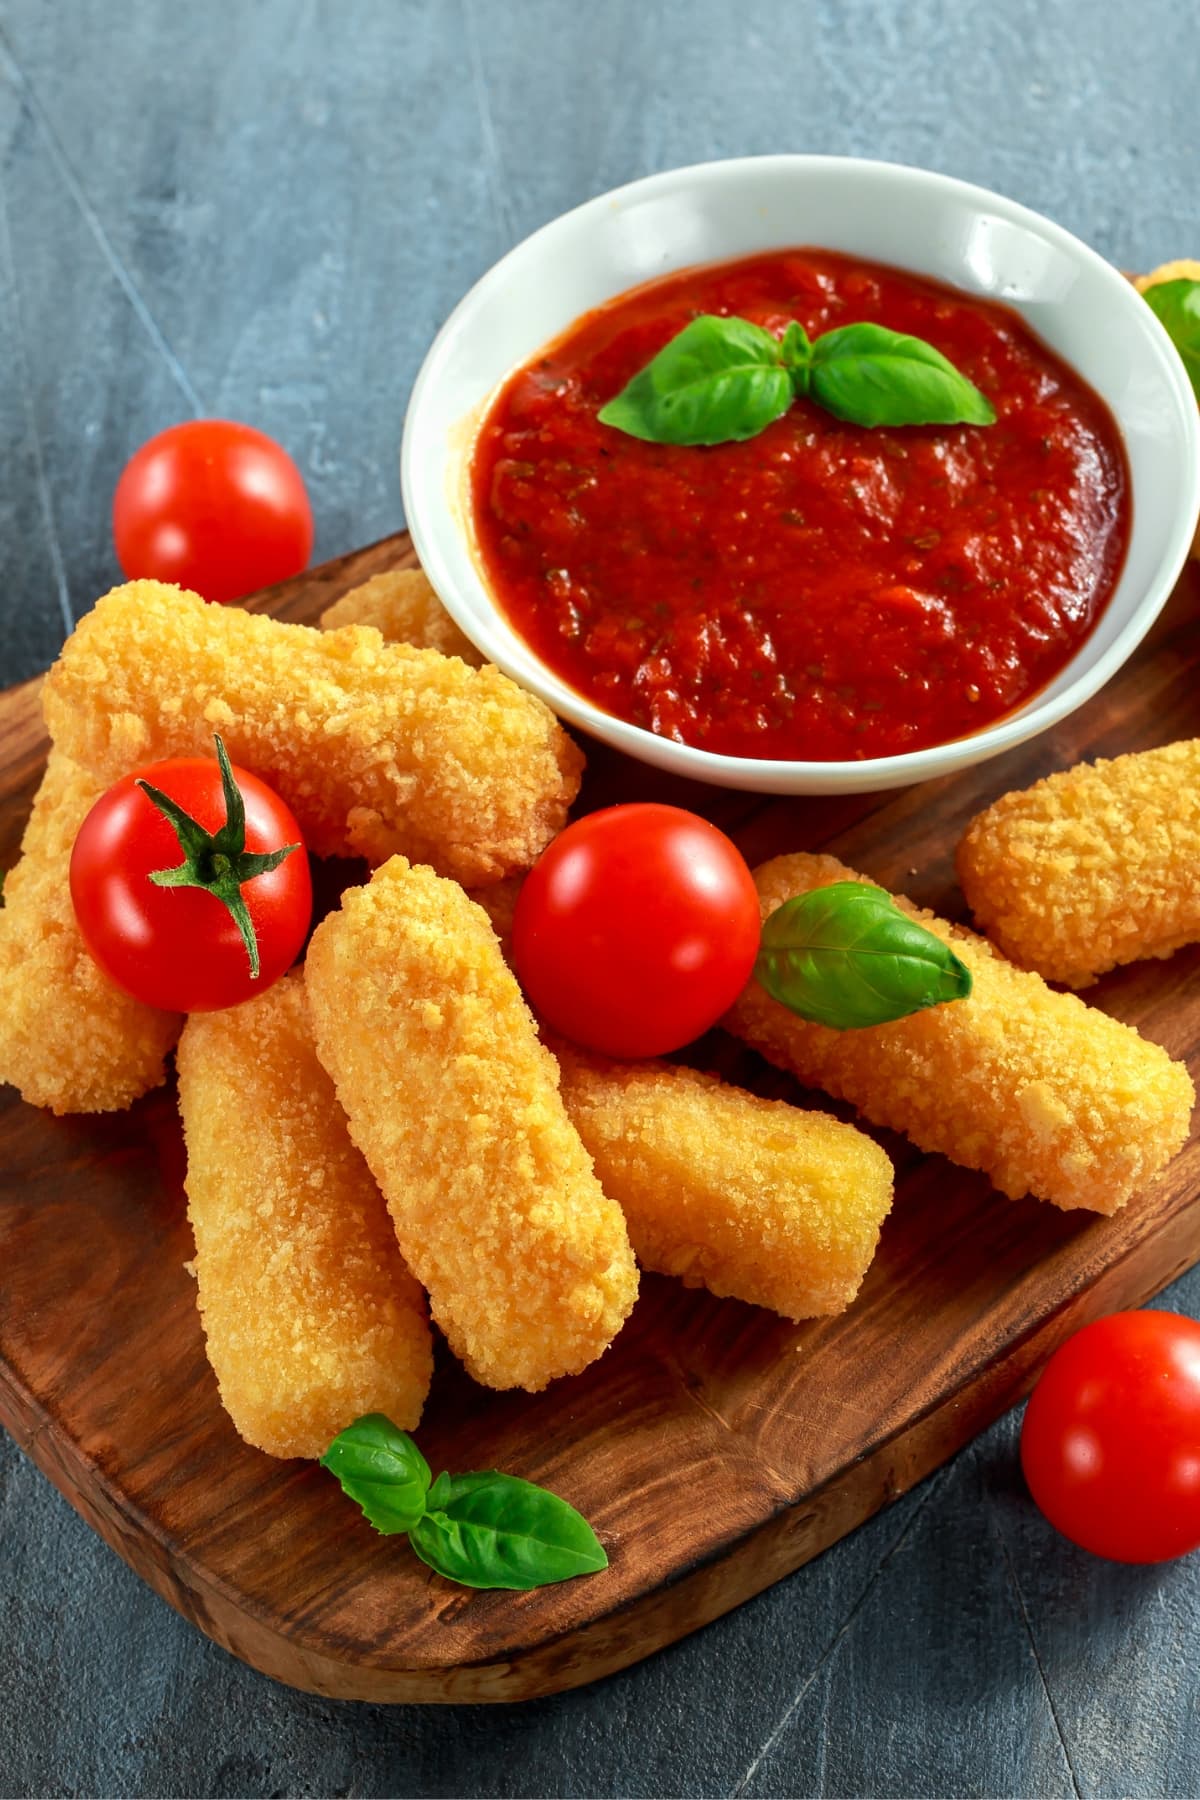 13 Dipping Sauces for Mozzarella Sticks (+ Best Recipes) - Insanely Good